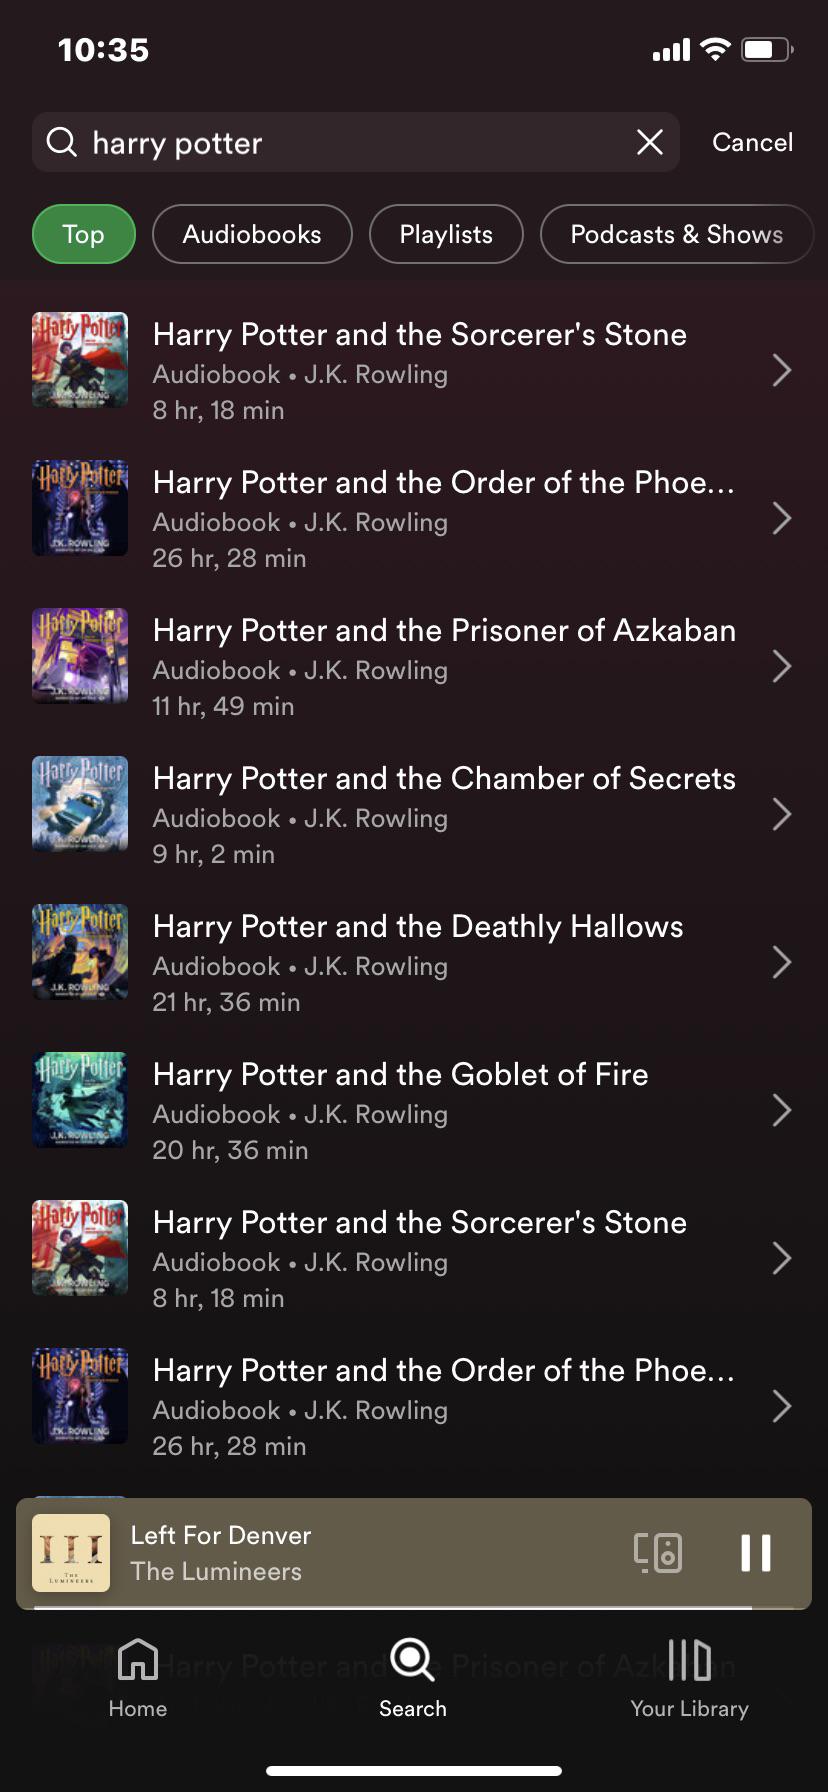 Are the Harry Potter books available in audiobook subscription services?